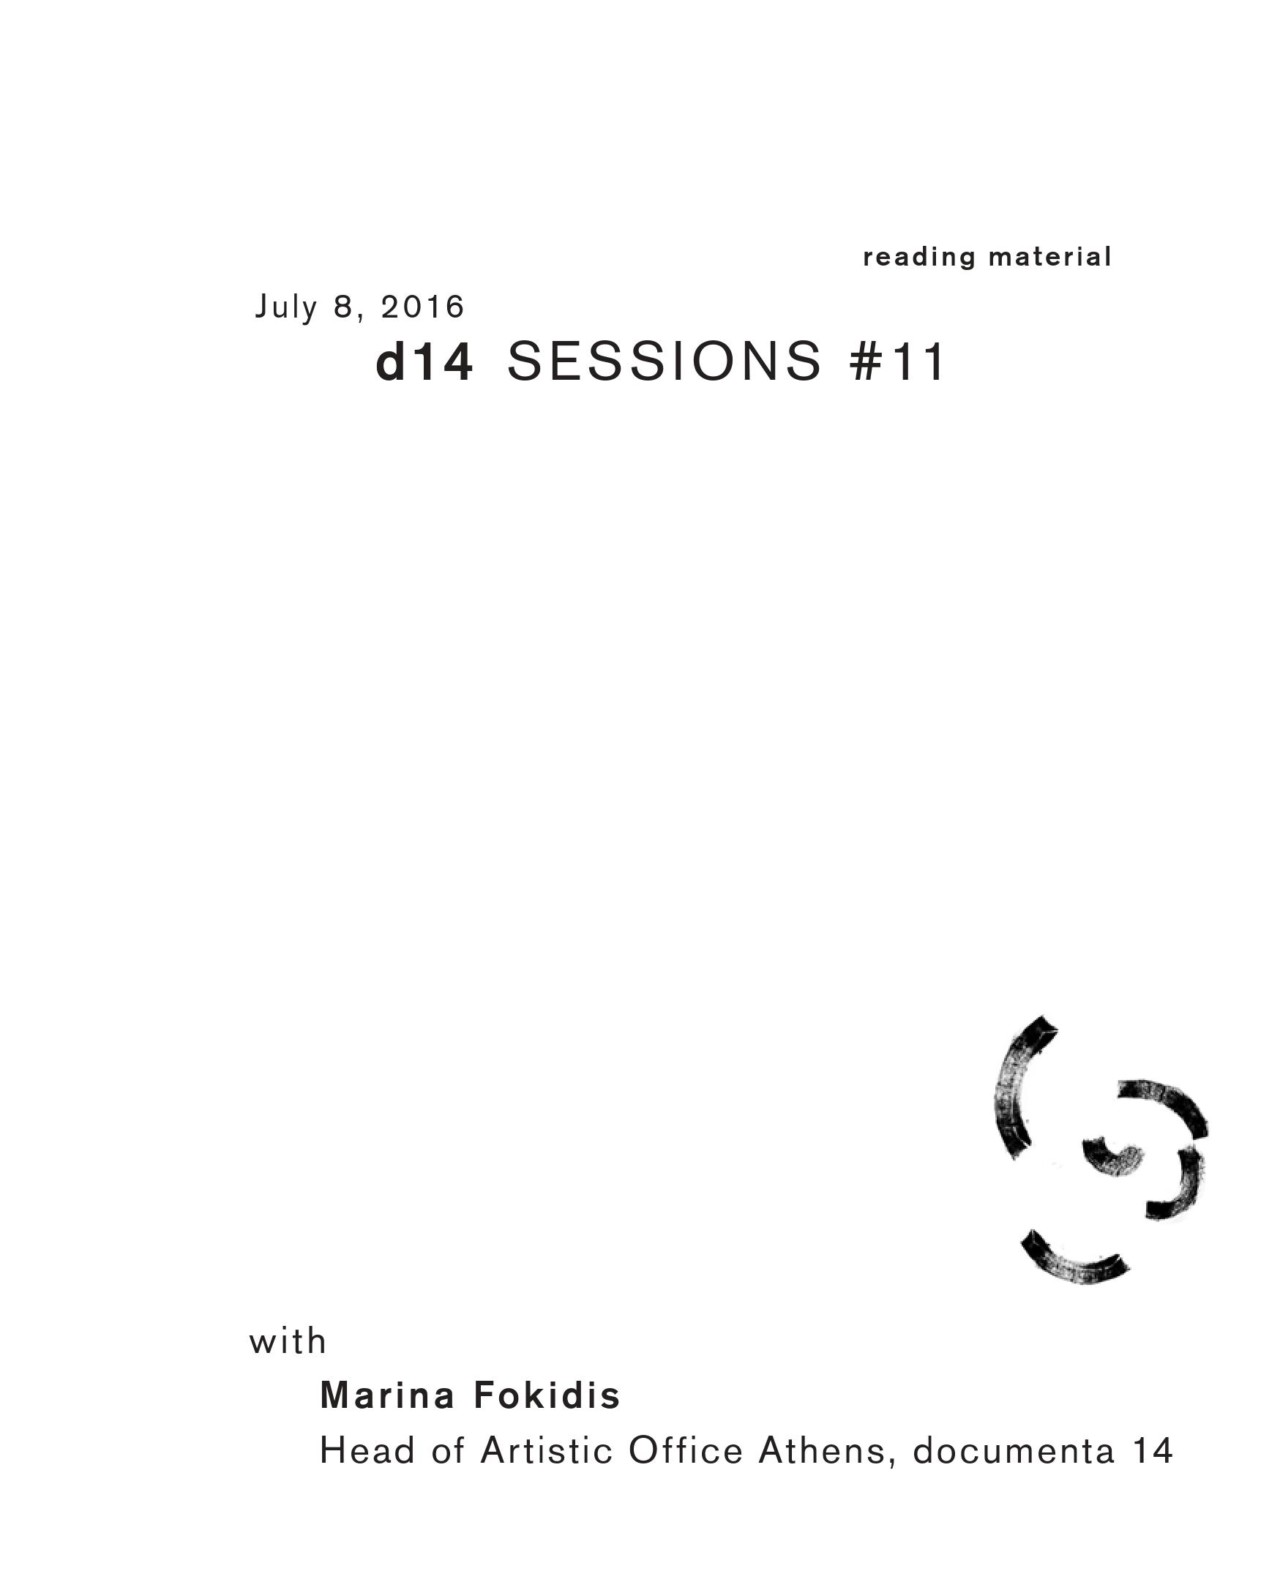 Membrane d14 SESSIONS #11 with Marina Fokidis, Head of Artistic Office Athens, d14